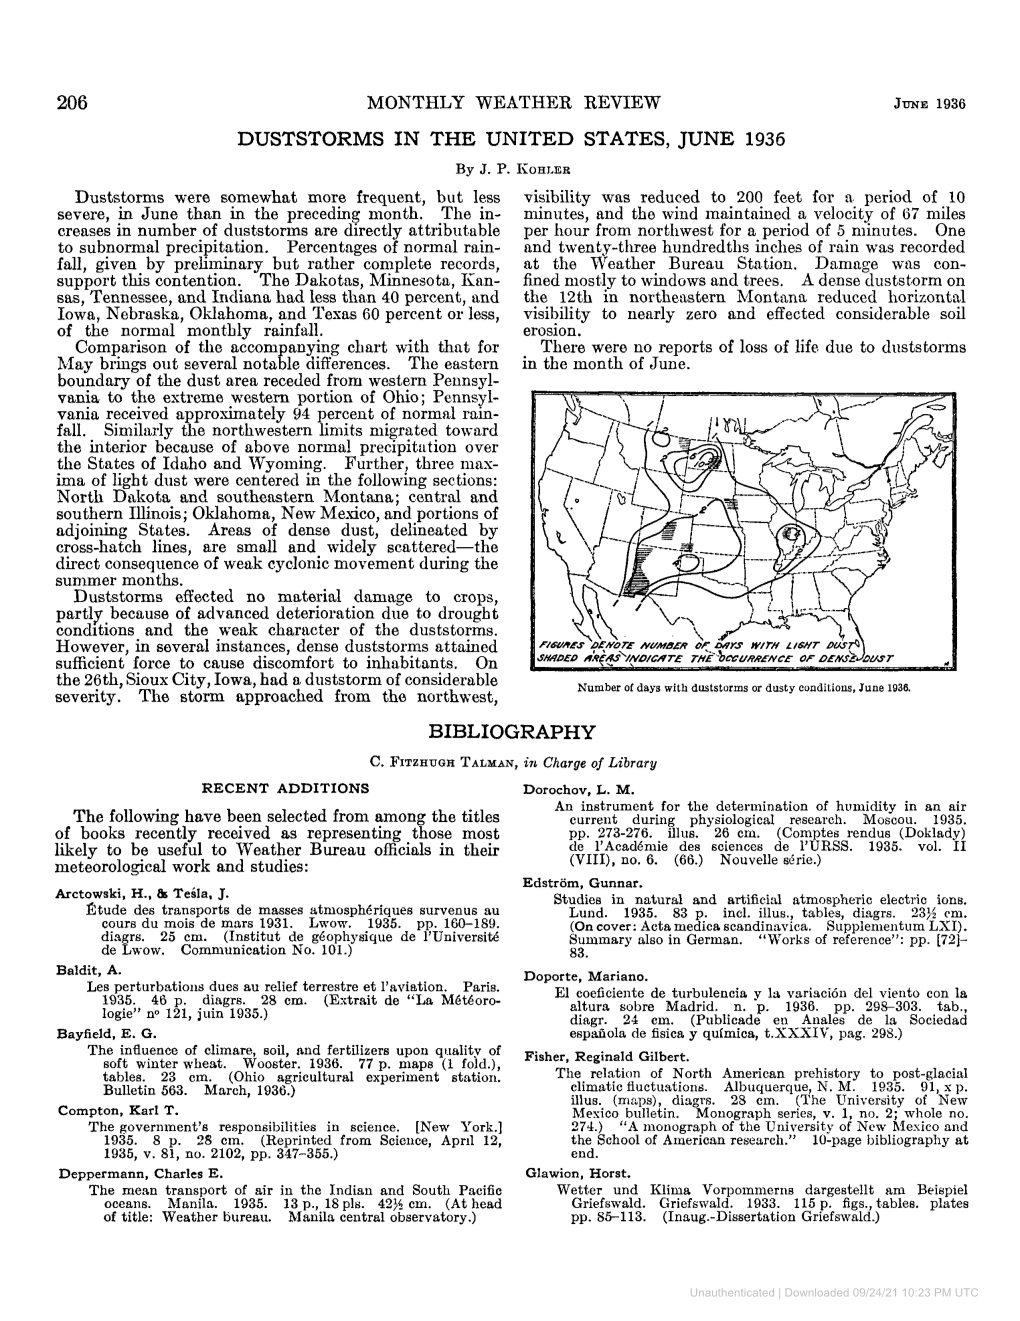 206 Duststorms in the United States, June 1936 Bibliography